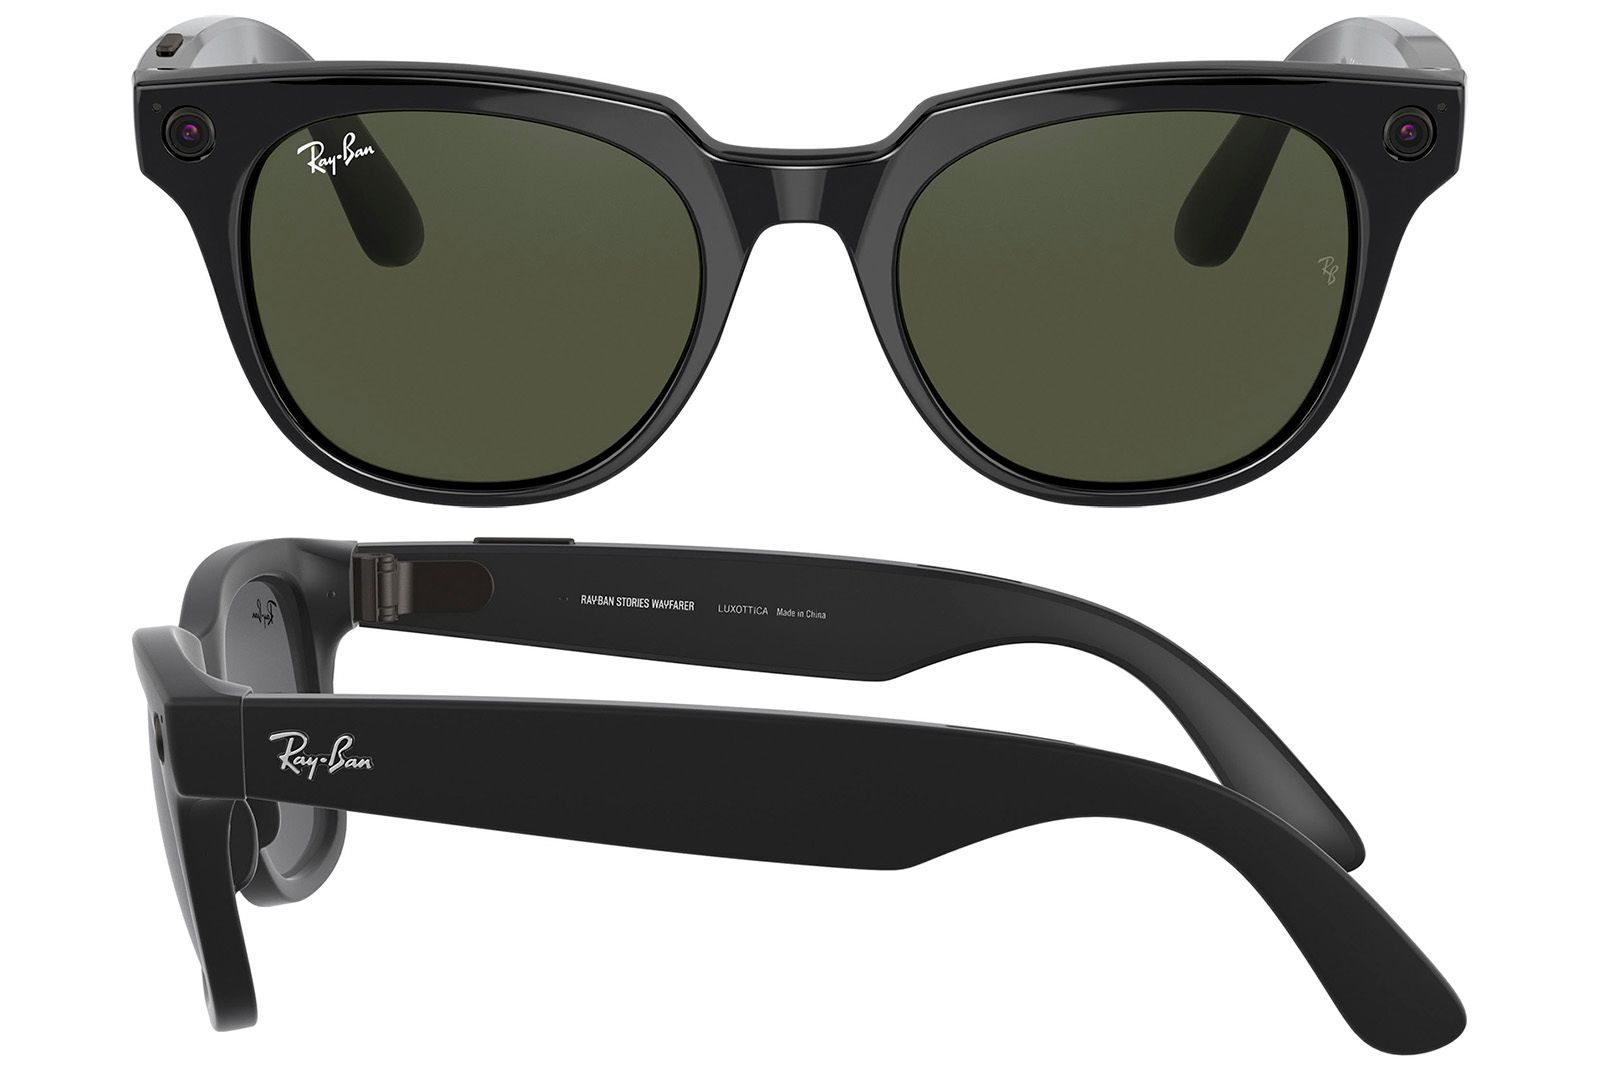 Facebook x Ray-Ban AR glasses leak with pictures galore